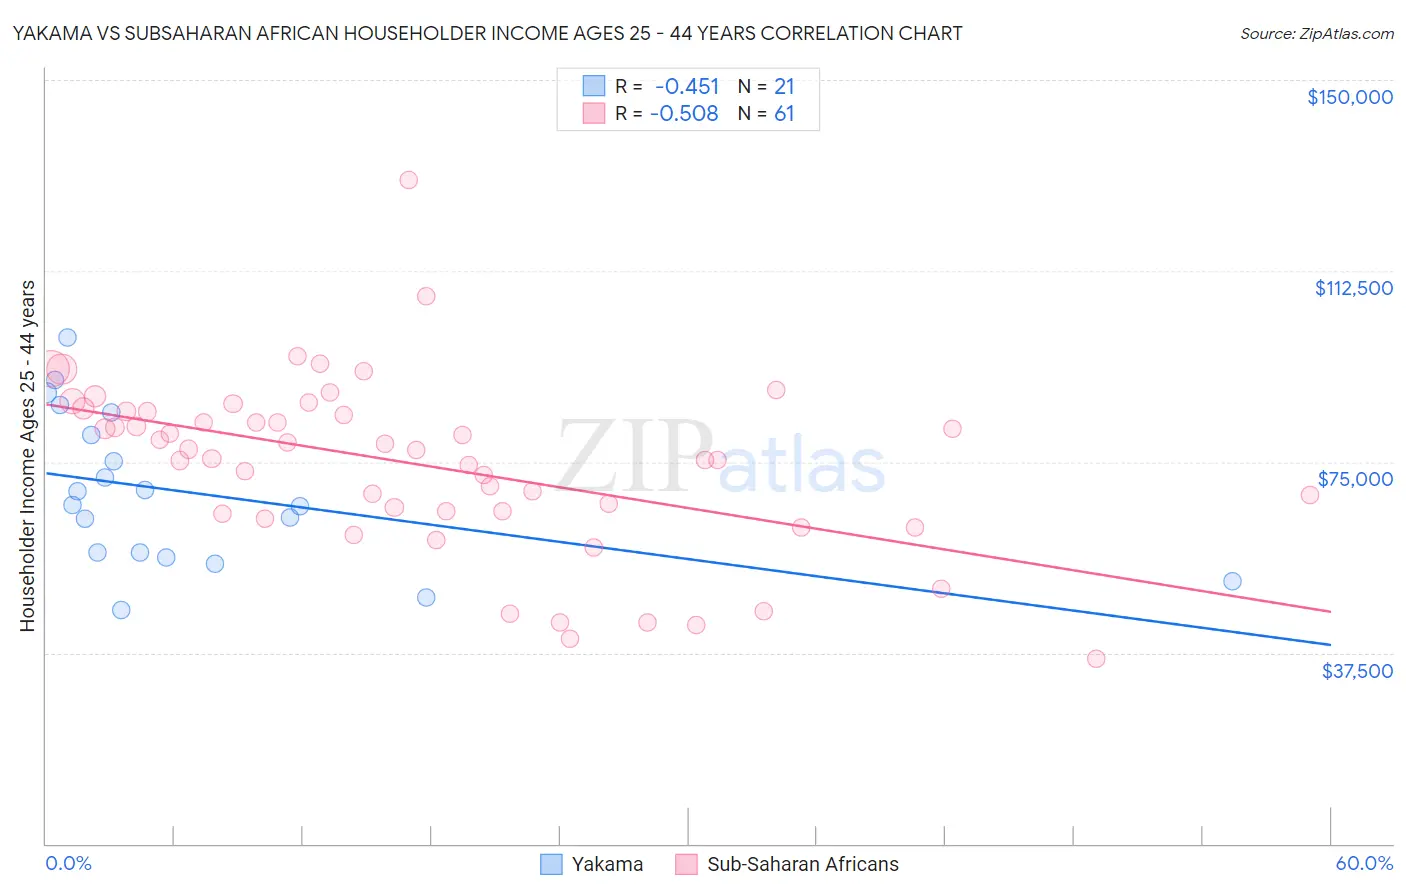 Yakama vs Subsaharan African Householder Income Ages 25 - 44 years